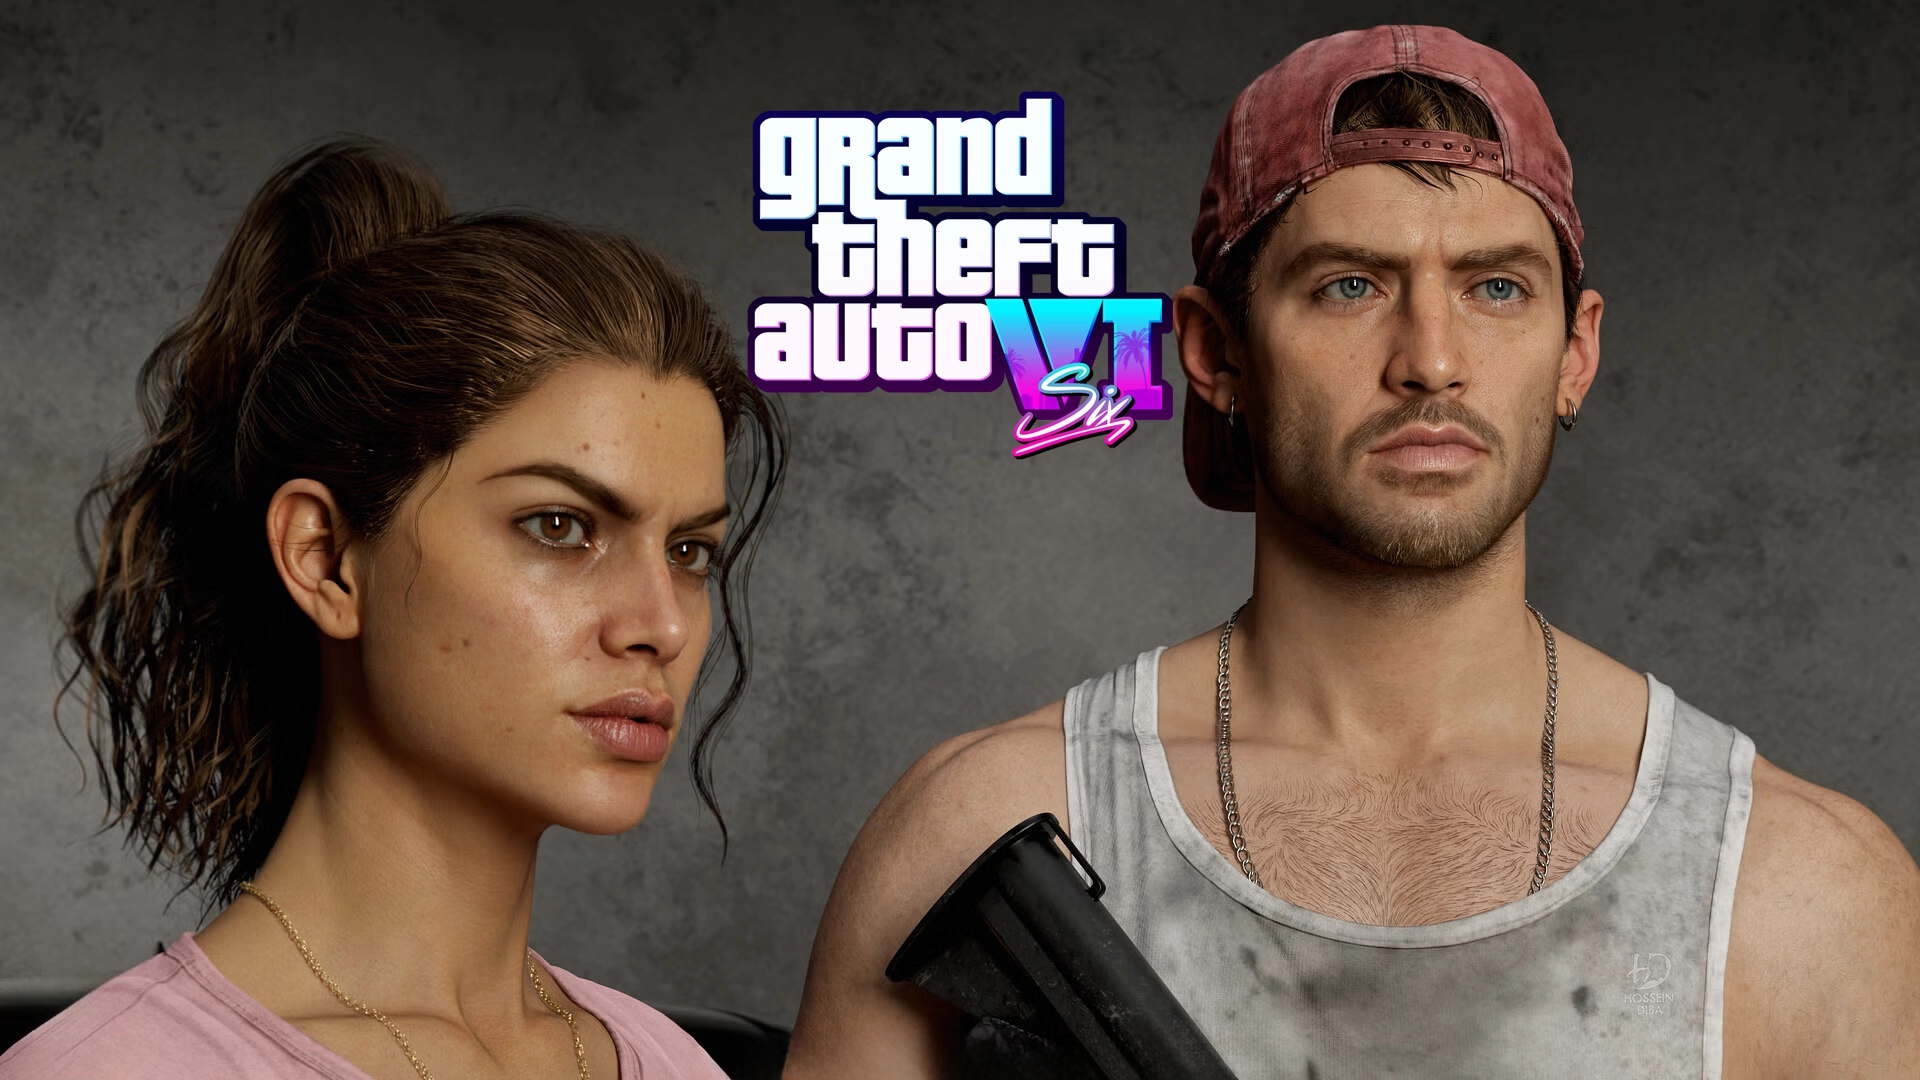 Gta 6 Meet The Protagonists Of Grand Theft Auto Vi Gta Rp Servers Gta Rp Download Fivem For 1155